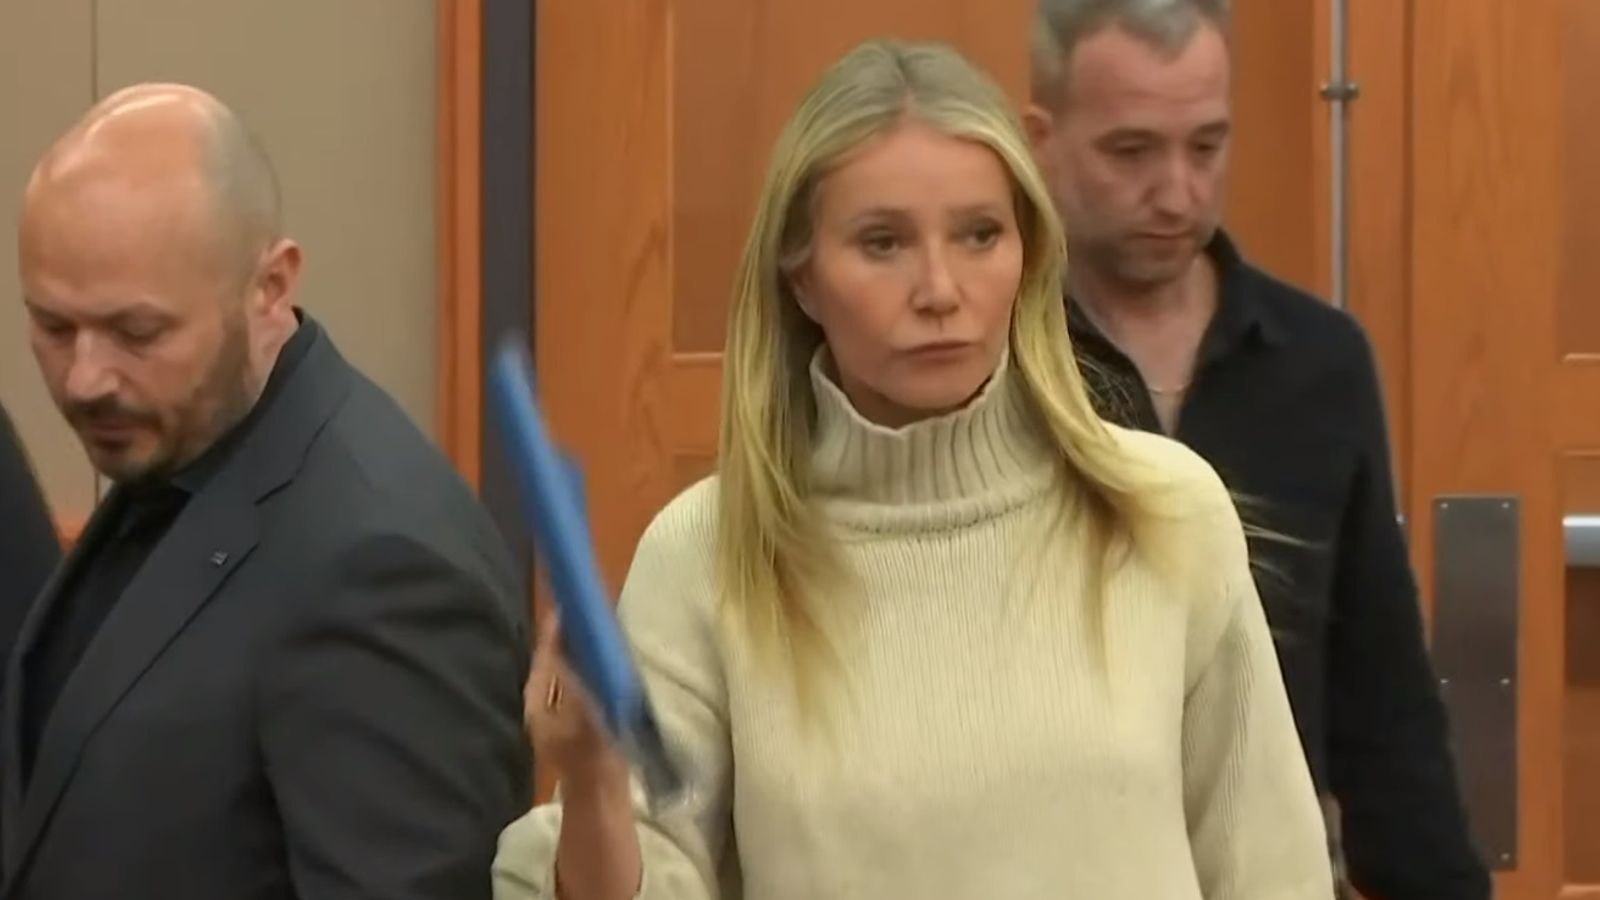 Gwyneth Paltrow ski crash court case starts in US after man accused her of seriously injuring him in 'hit-and-run'